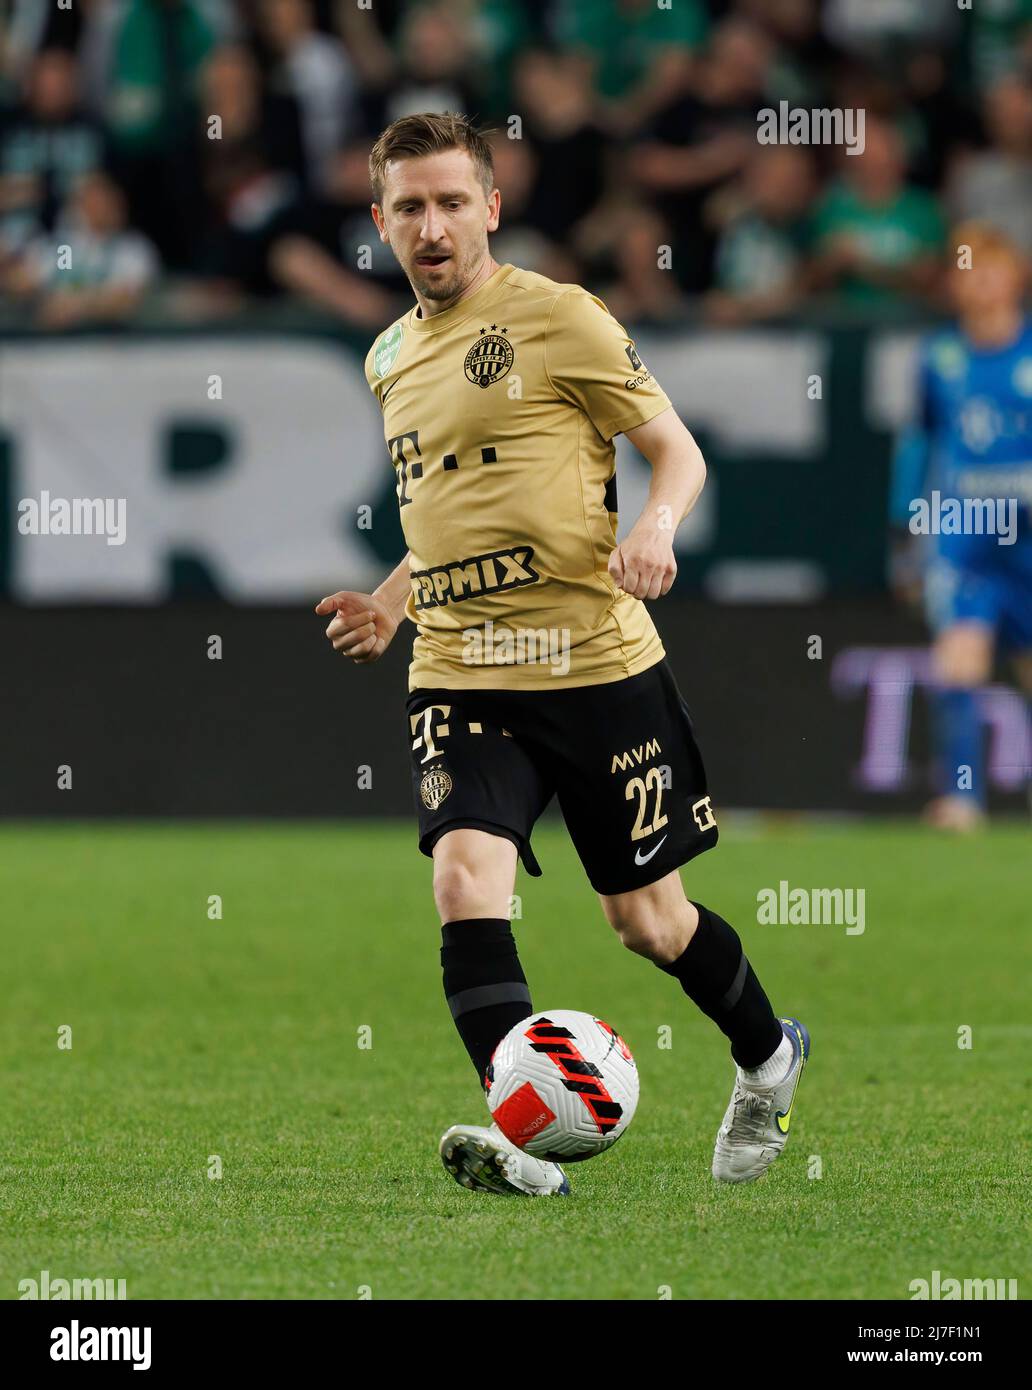 BUDAPEST, HUNGARY - MAY 7: Muhamed Besic of Ferencvarosi TC runs with the  ball during the Hungarian OTP Bank Liga match between Ferencvarosi TC and  MTK Budapest at Groupama Arena on May